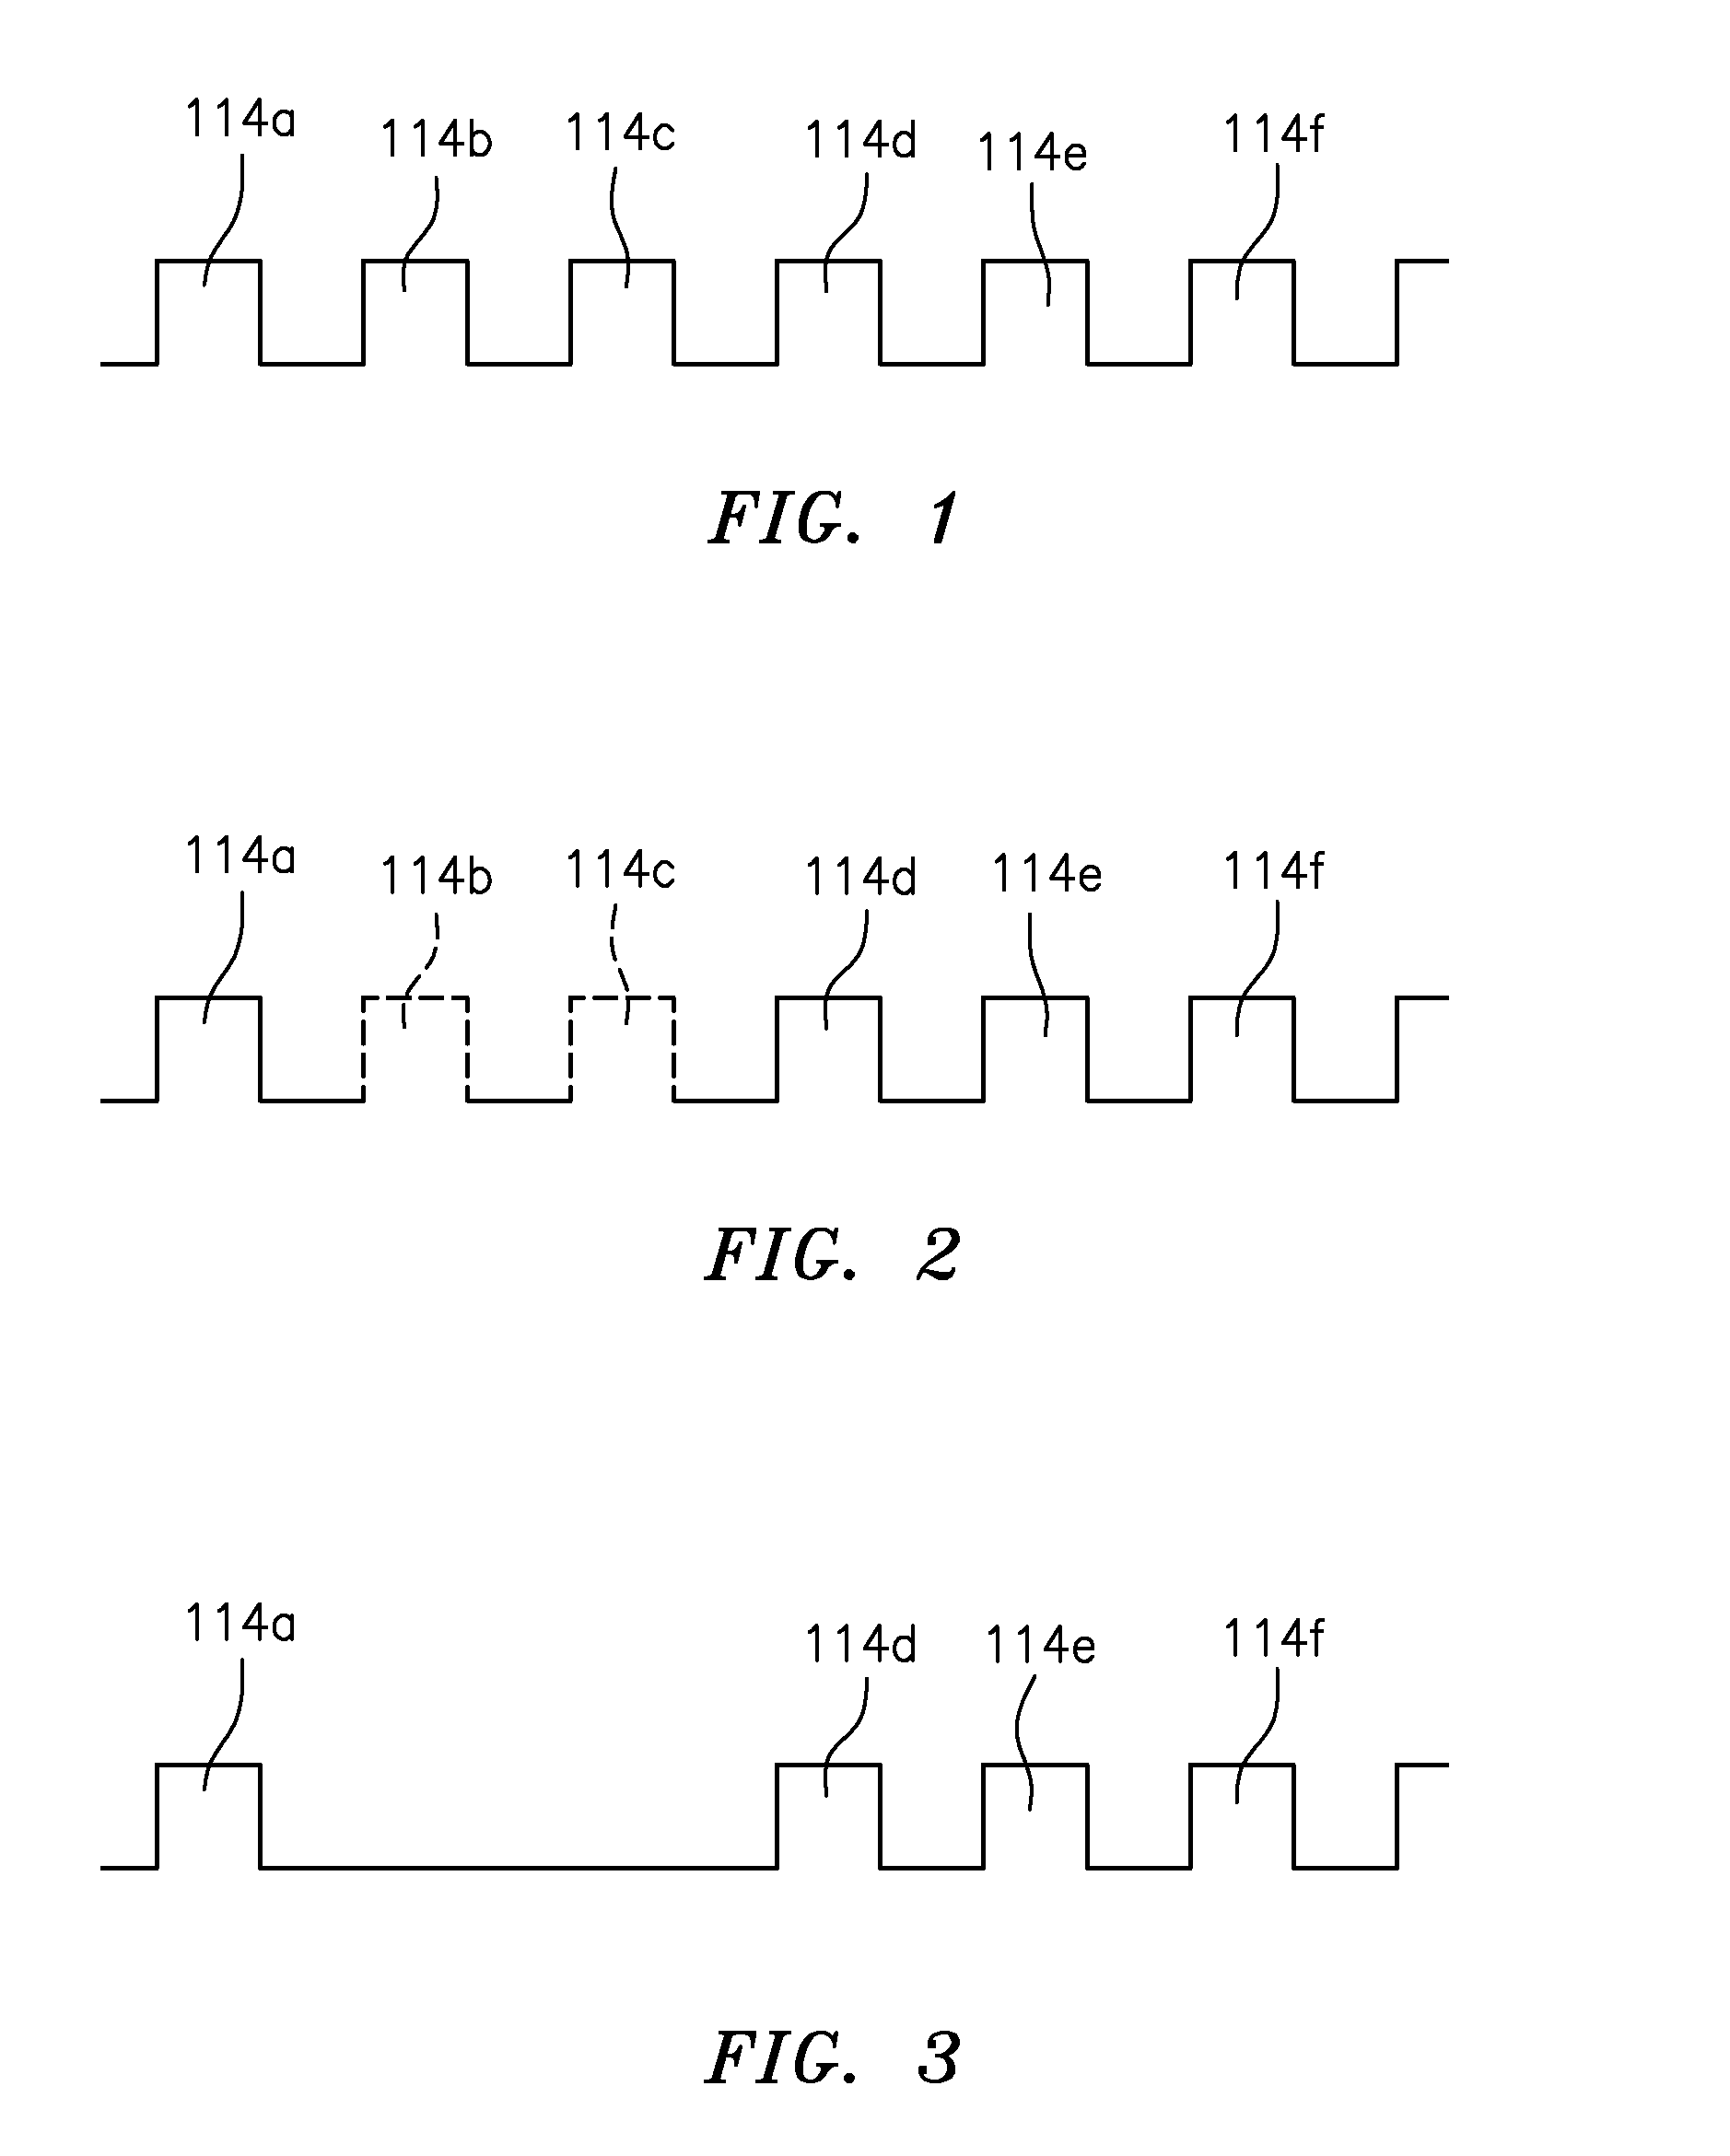 Method for removing motion from non-ct sequential x-ray images